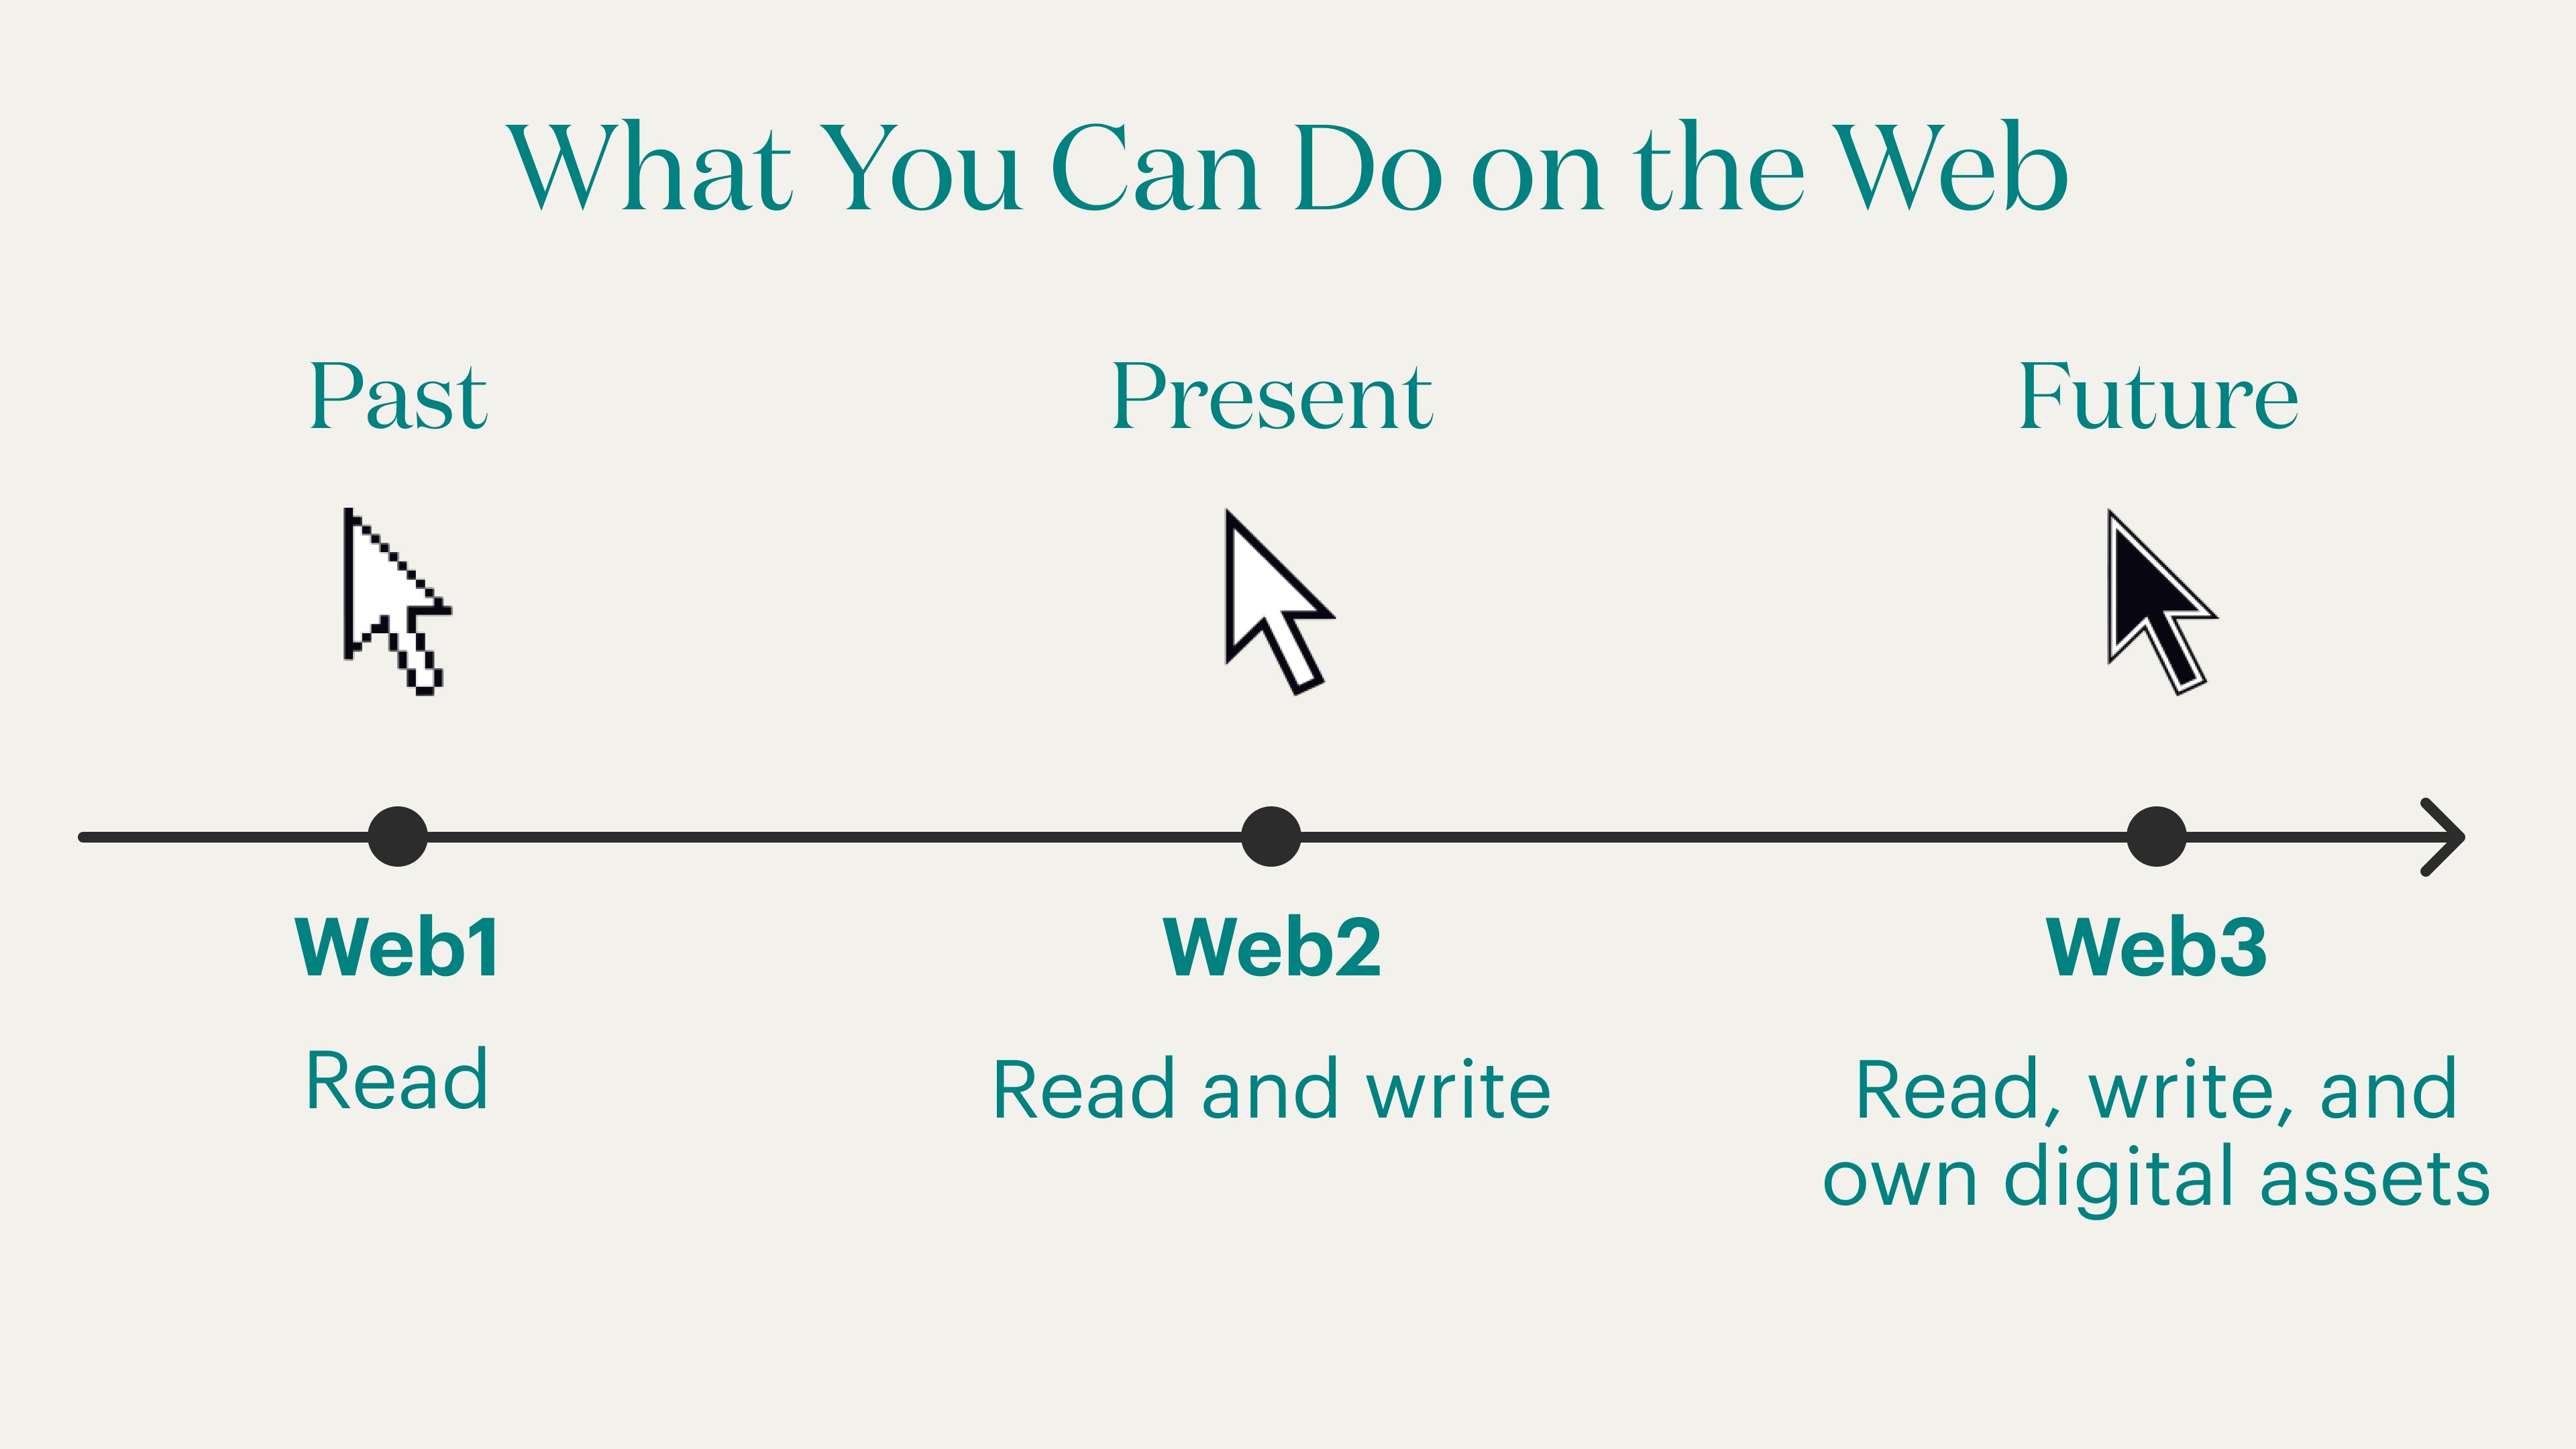 Web3: Read, Write, and Own